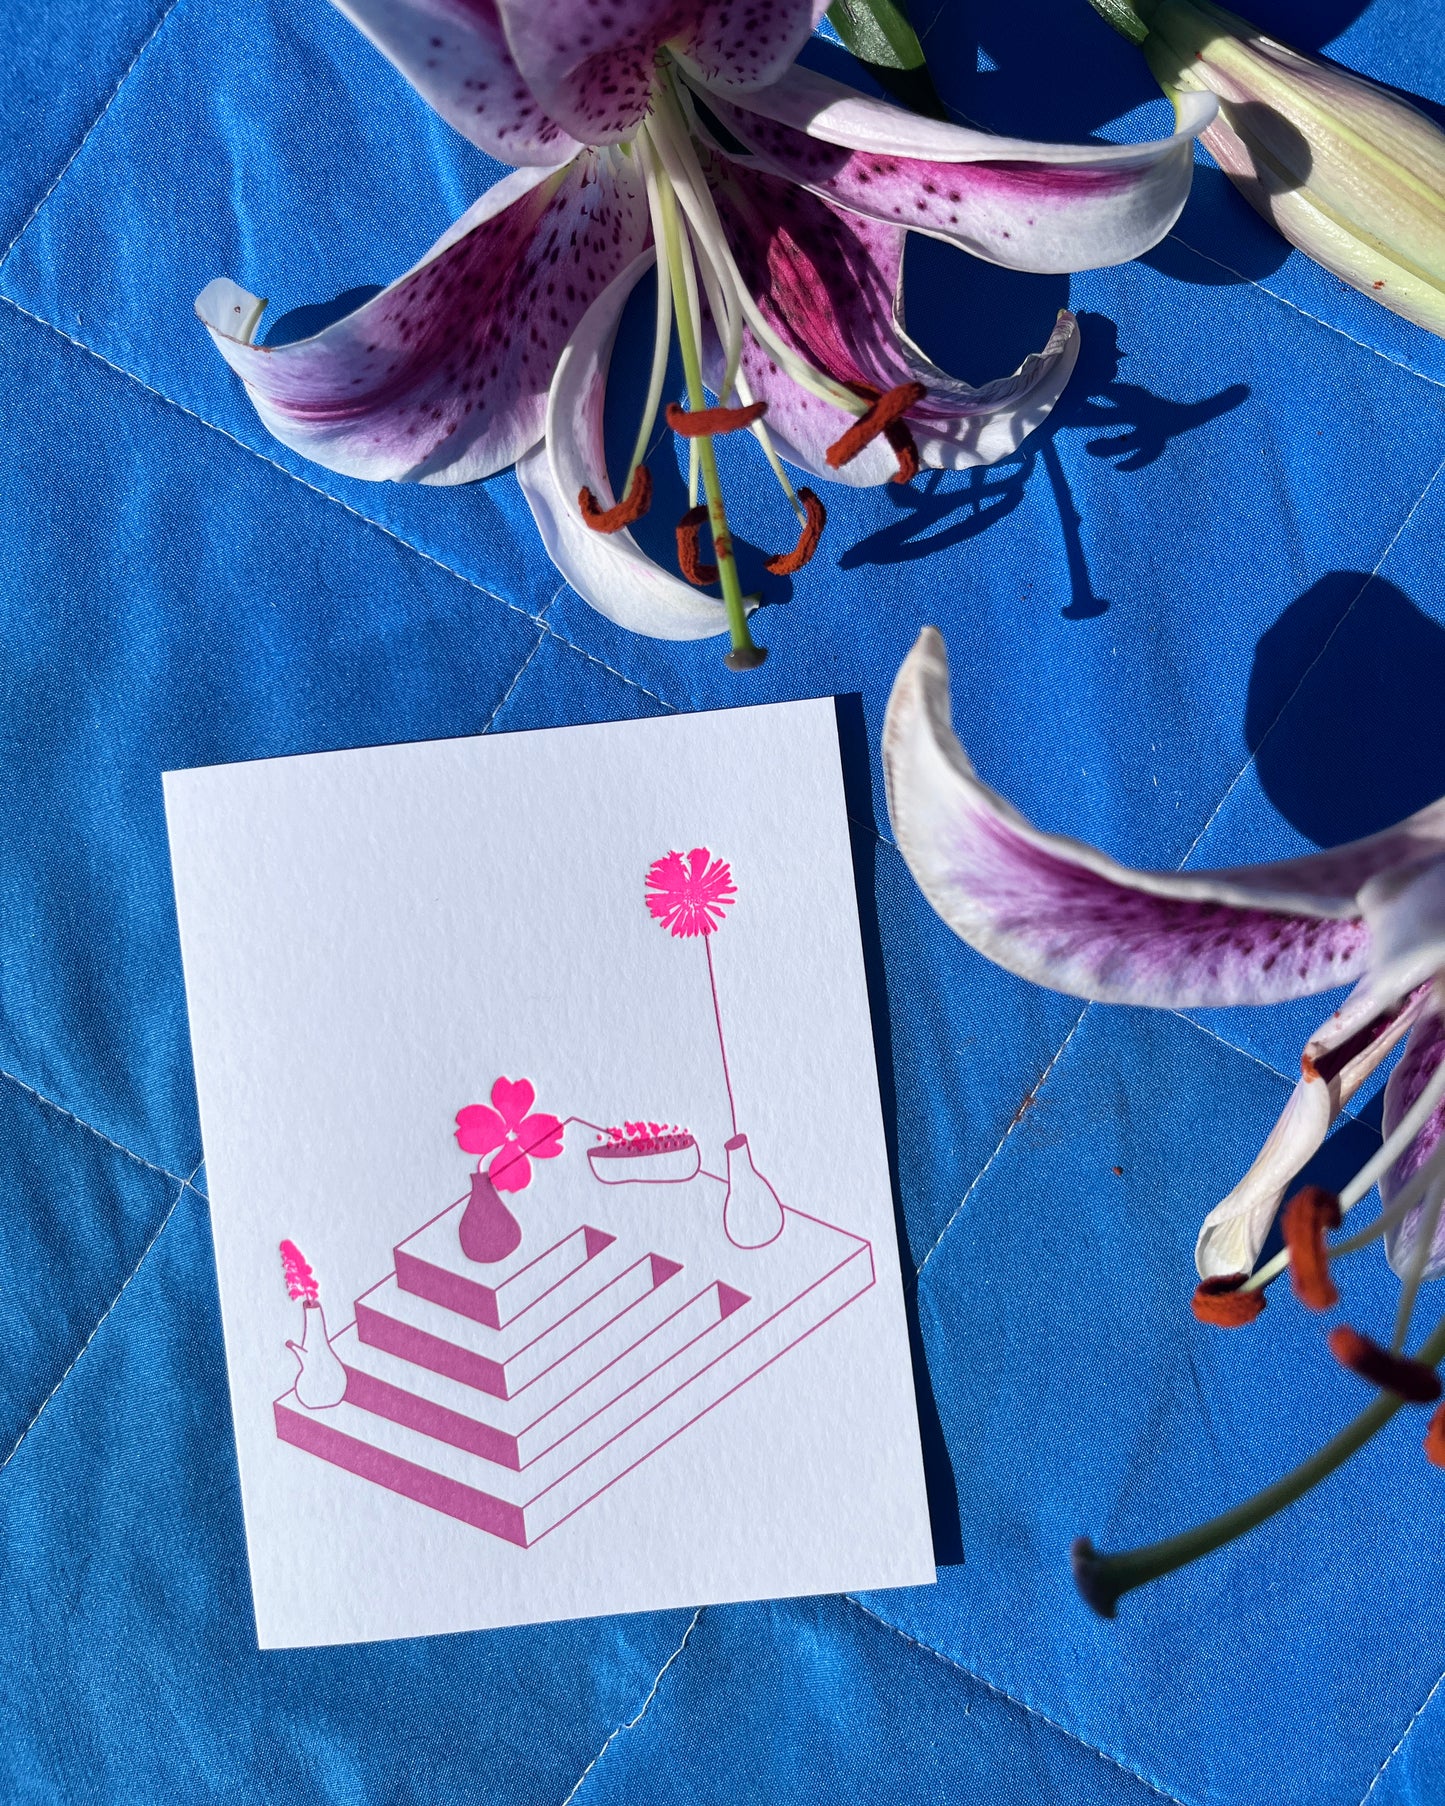 Pink Bloom Stairs Card, David Bernabo x Meshwork, #161 (limited edition)